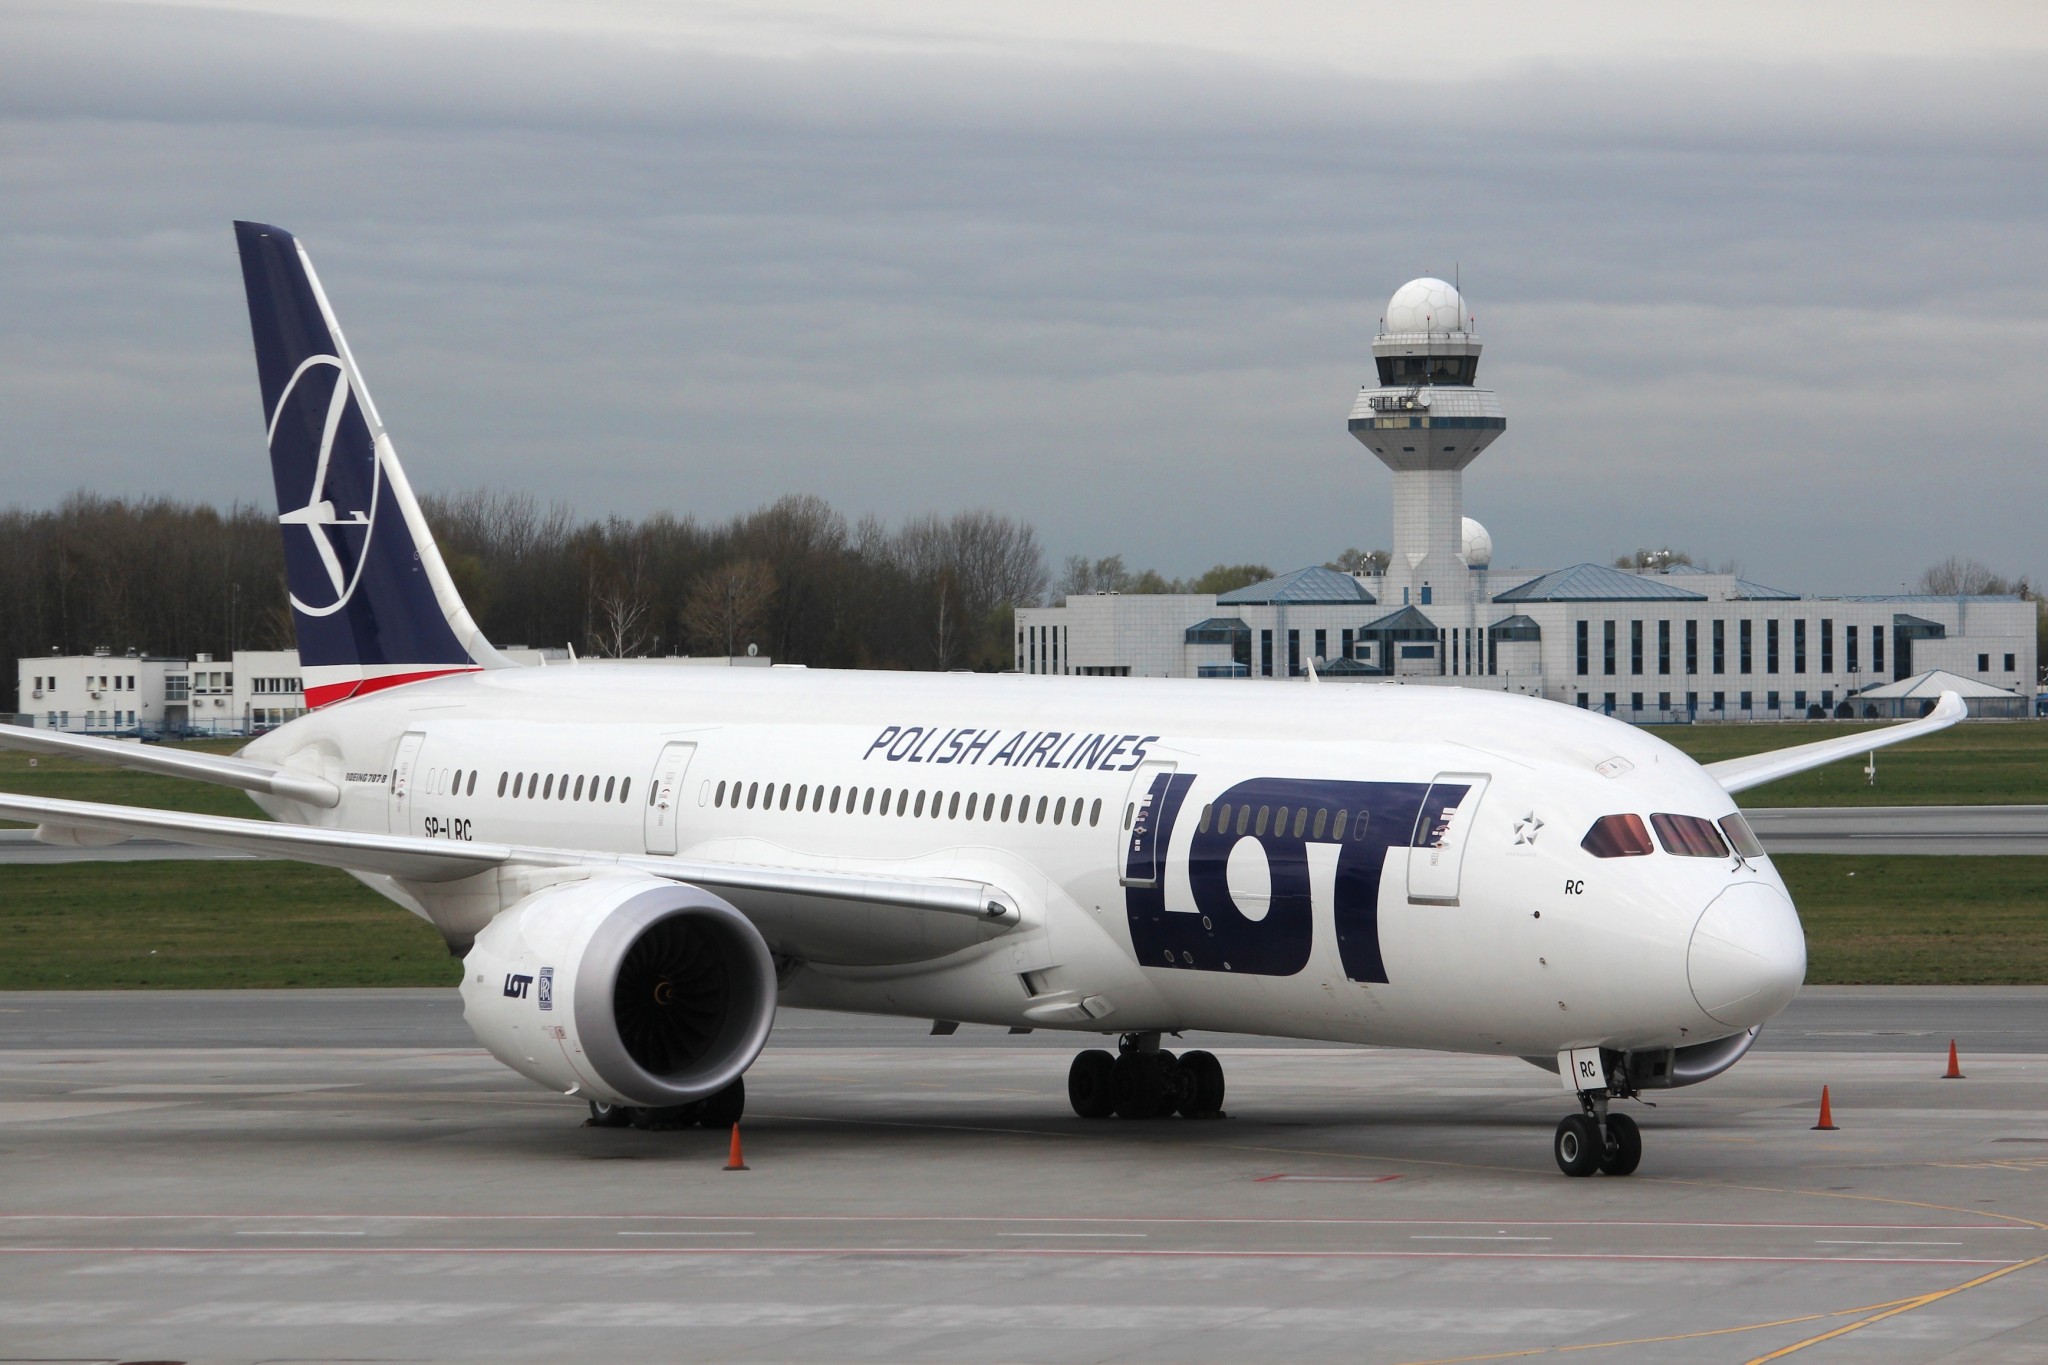 LOT to launch daily flights from Warsaw to Kiev